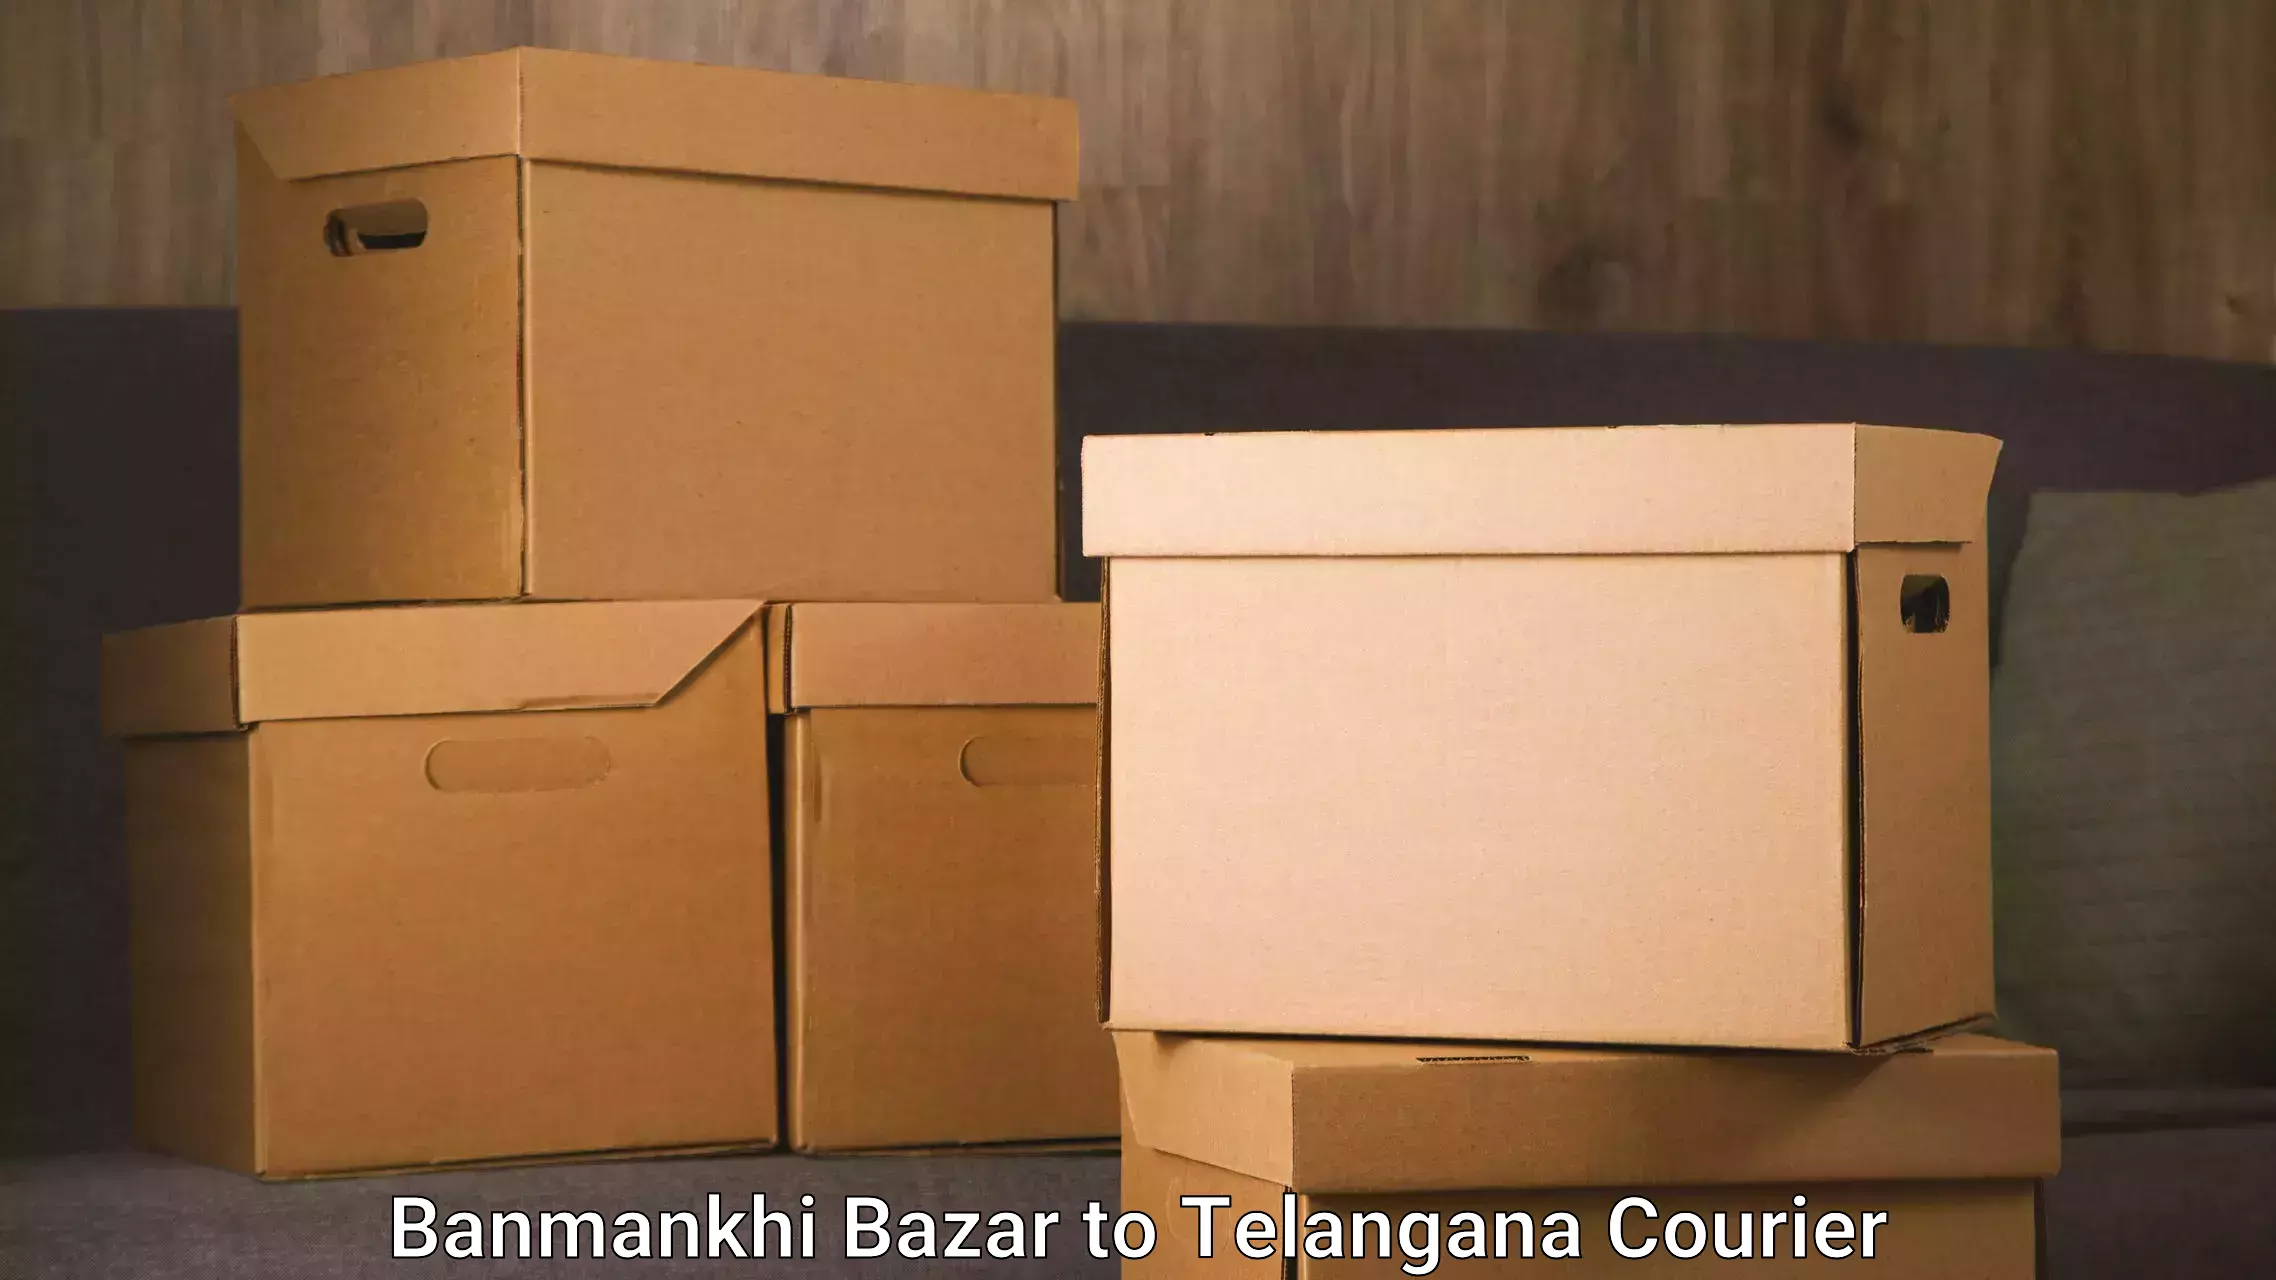 Professional movers and packers Banmankhi Bazar to Hajipur Mancherial